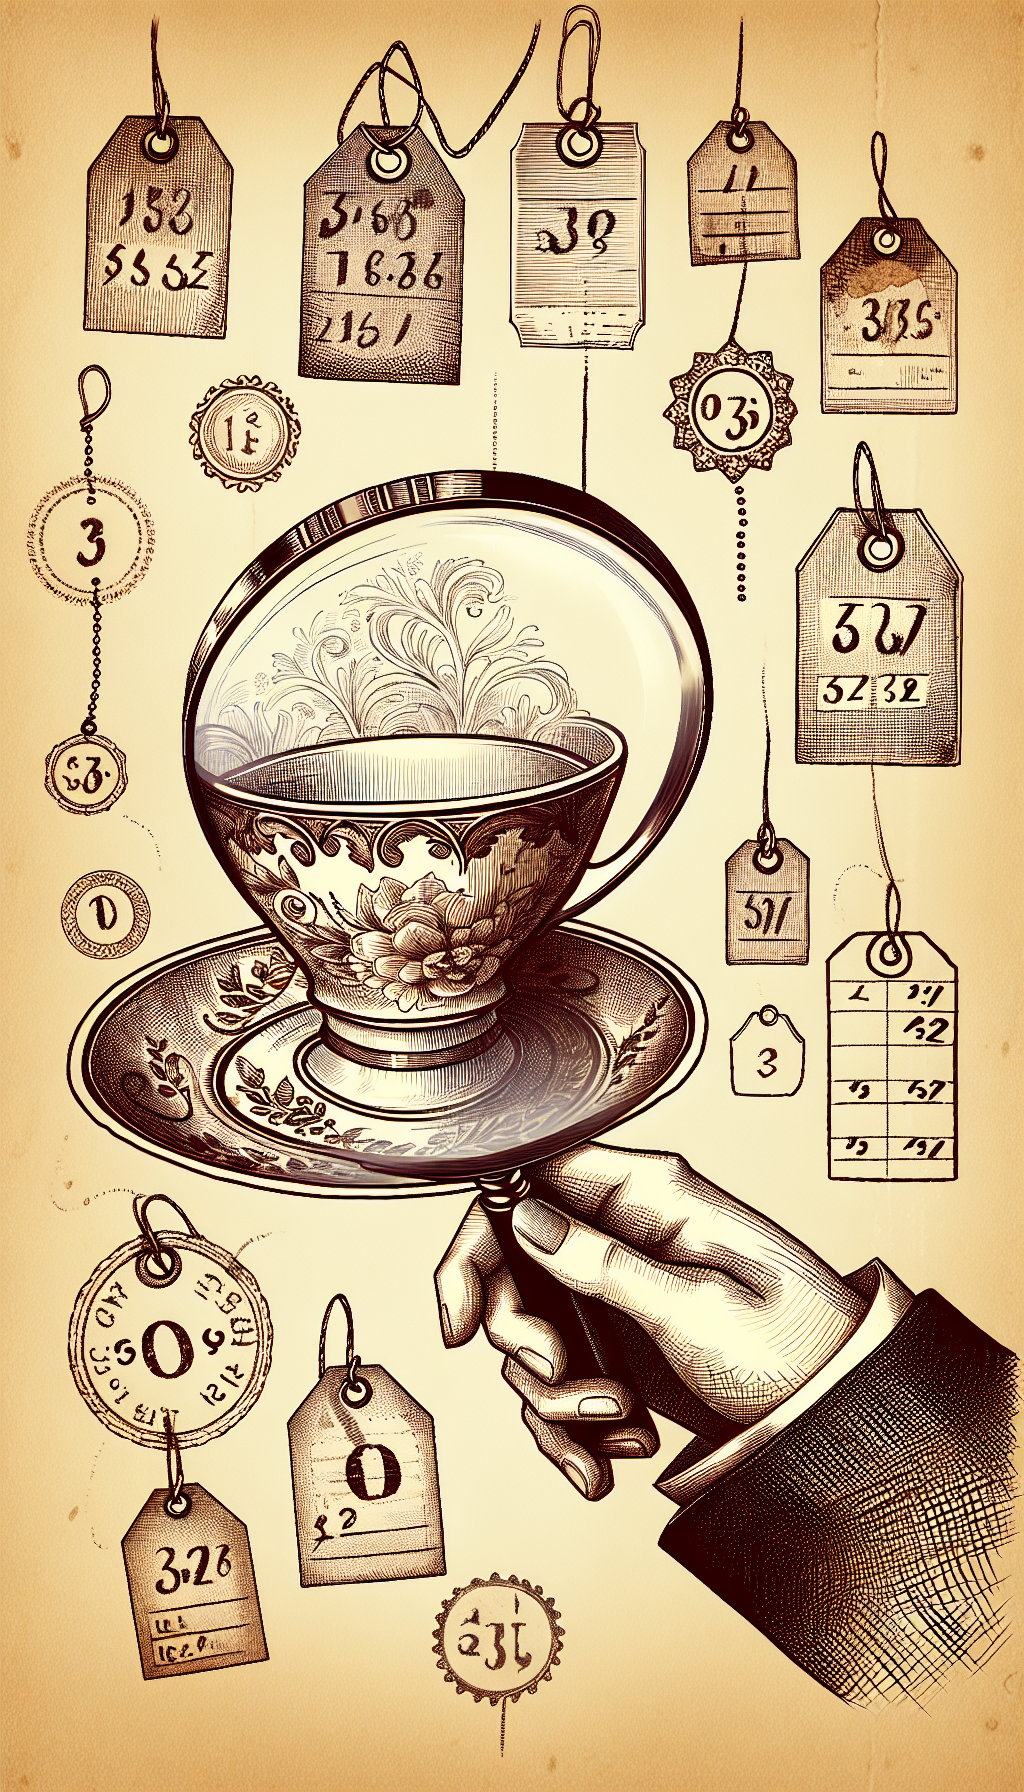 An intricate line-drawn sleuth magnifying glass peers into the delicate swirl of a vintage tea cup, revealing faint hallmark stamps amid its Victorian patterns. Sketched price tags dangle from the cup's handle, gradually increasing in value with the age of each deciphered mark, blending a detective aesthetic with whimsical antique charm in a sepia-toned vignette.